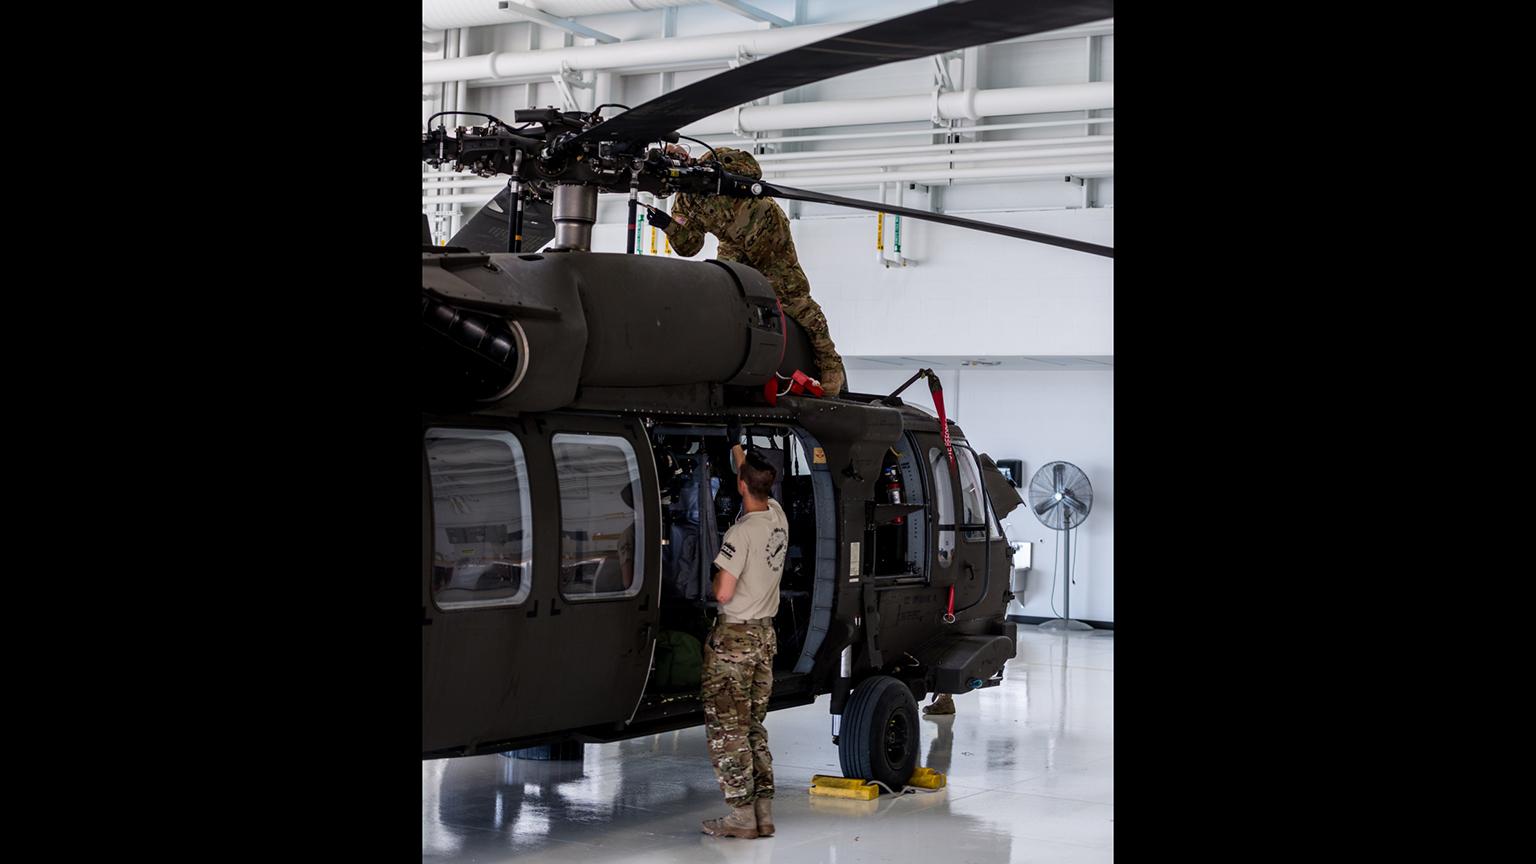 Illinois National Guard soldiers prepare a UH-60 Blackhawk to depart Kankakee in support of Hurricane Florence relief efforts. (Sgt. Stephen Gifford / Illinois National Guard)